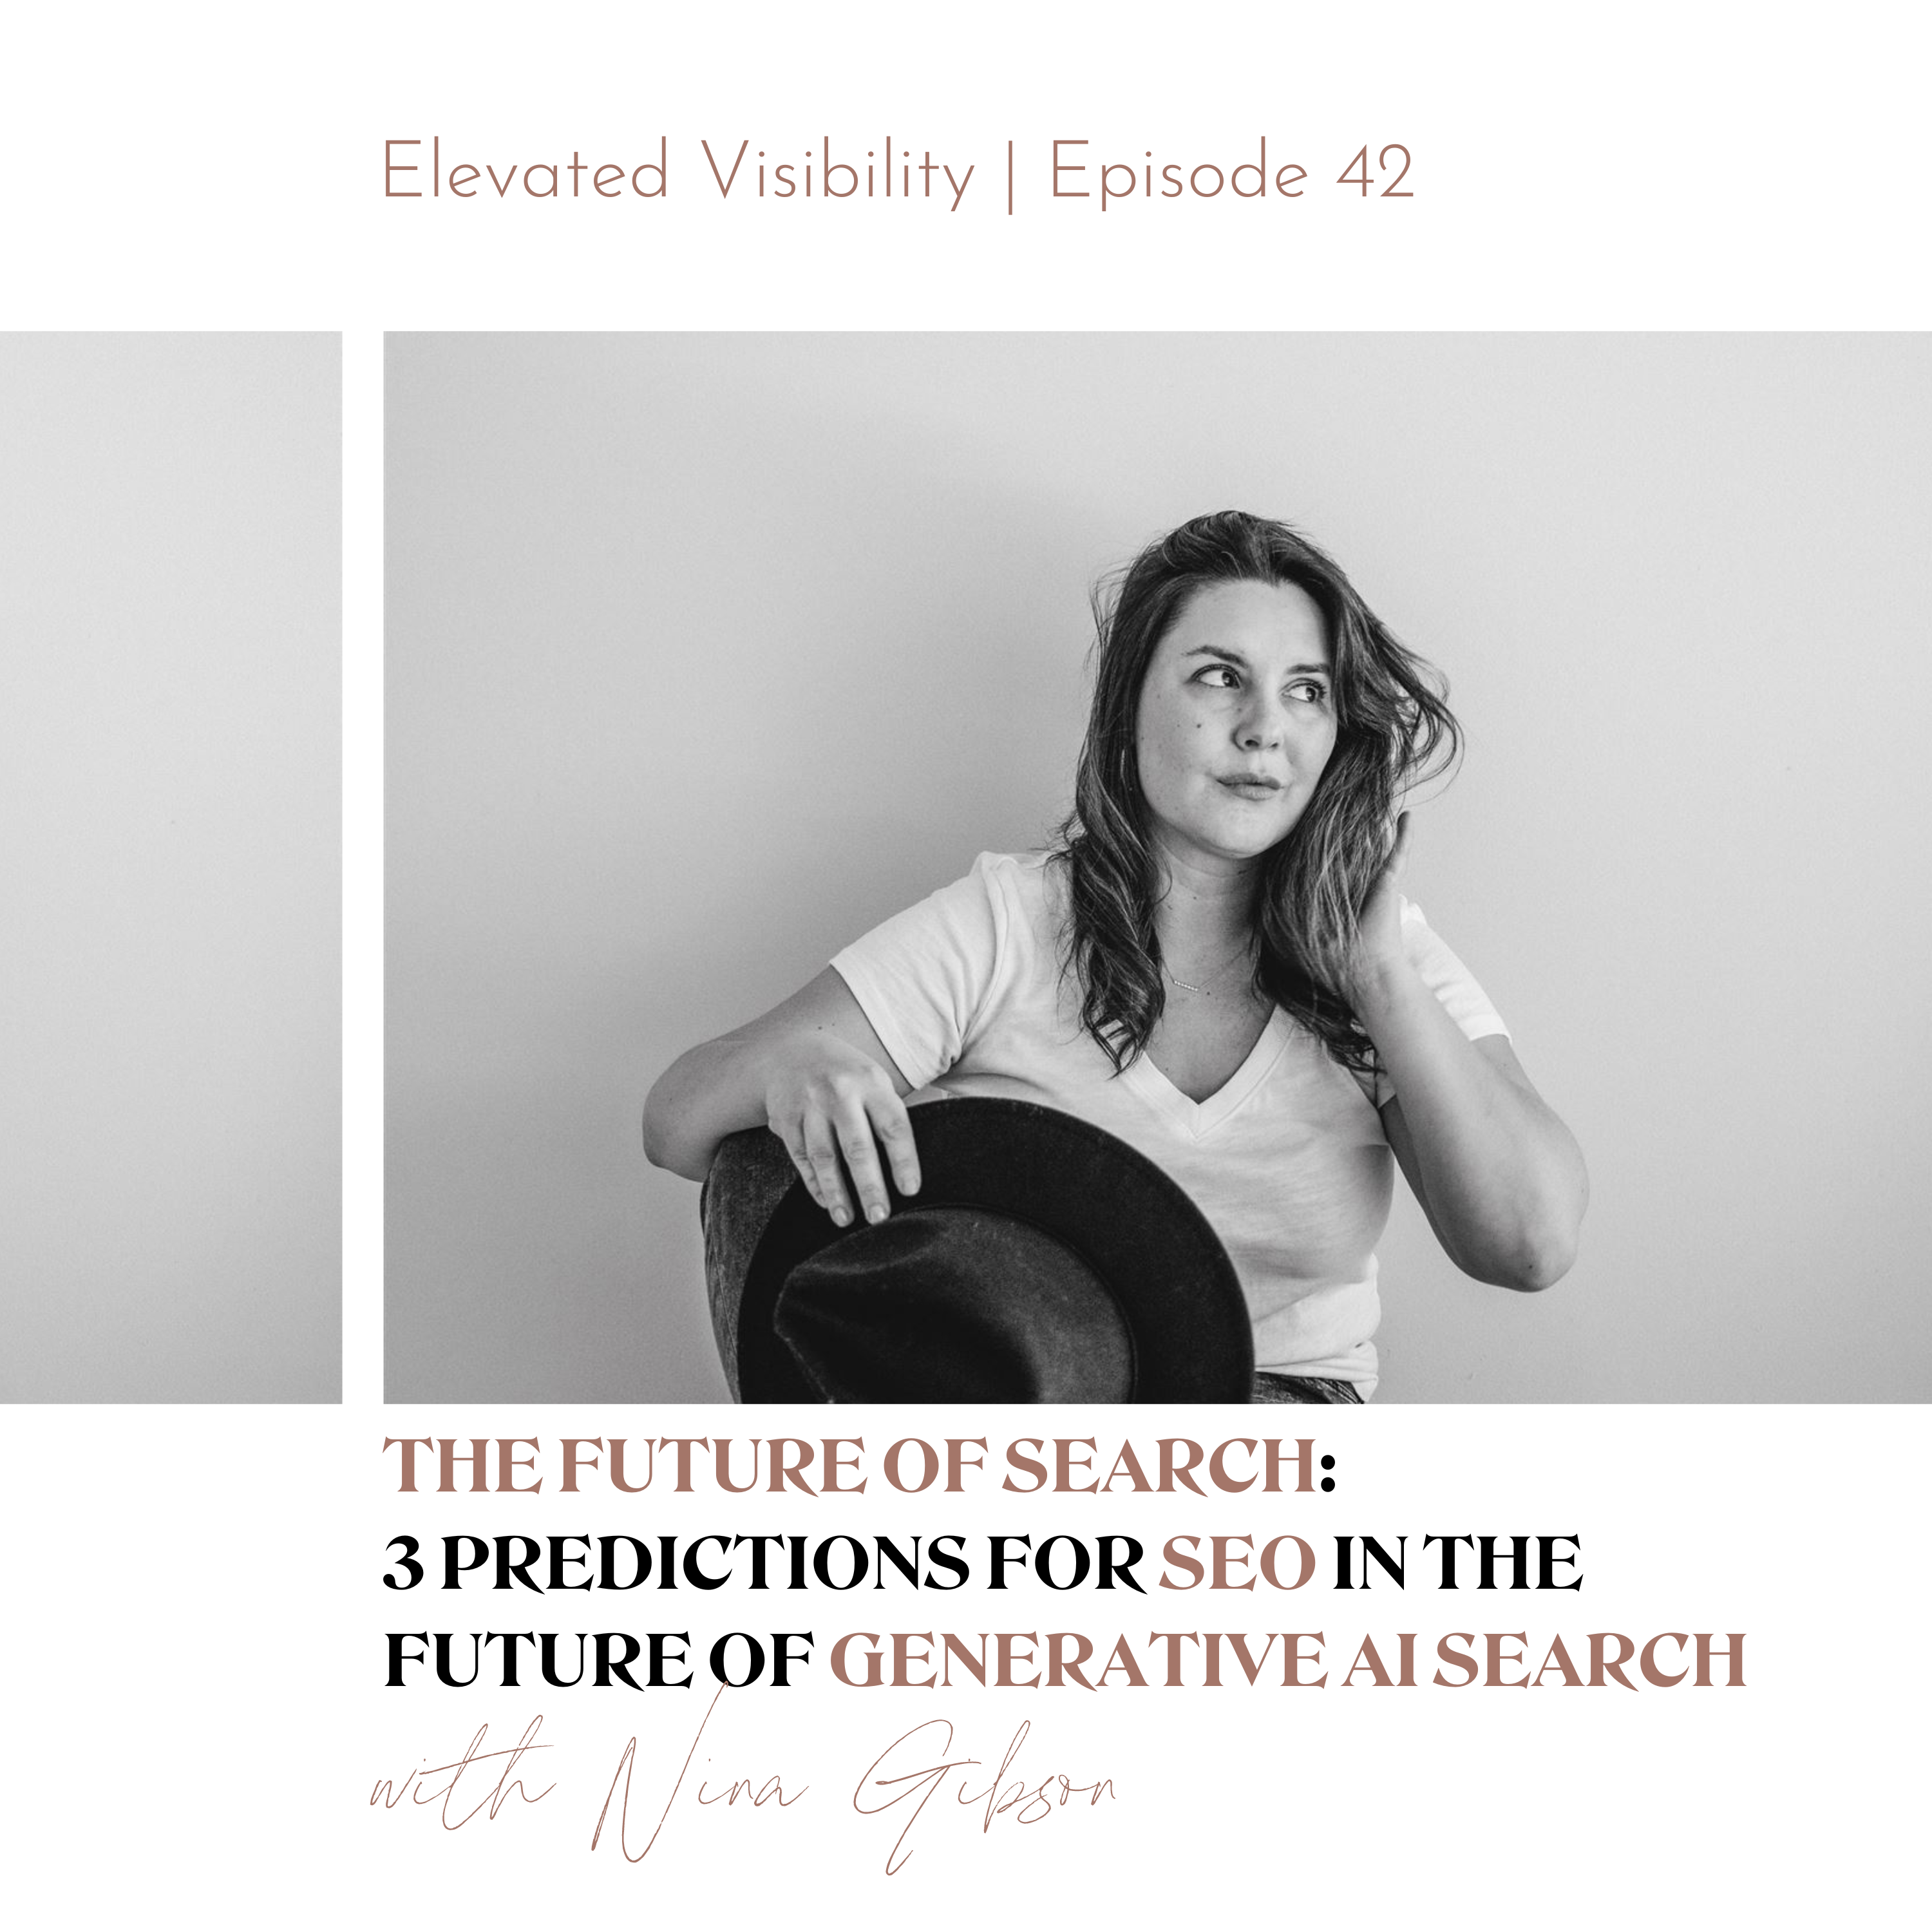 Elevated Visibility Podcast Episode 42 The Future of Search: 3 Predictions for SEO in the Future of Generative AI Search - featured image